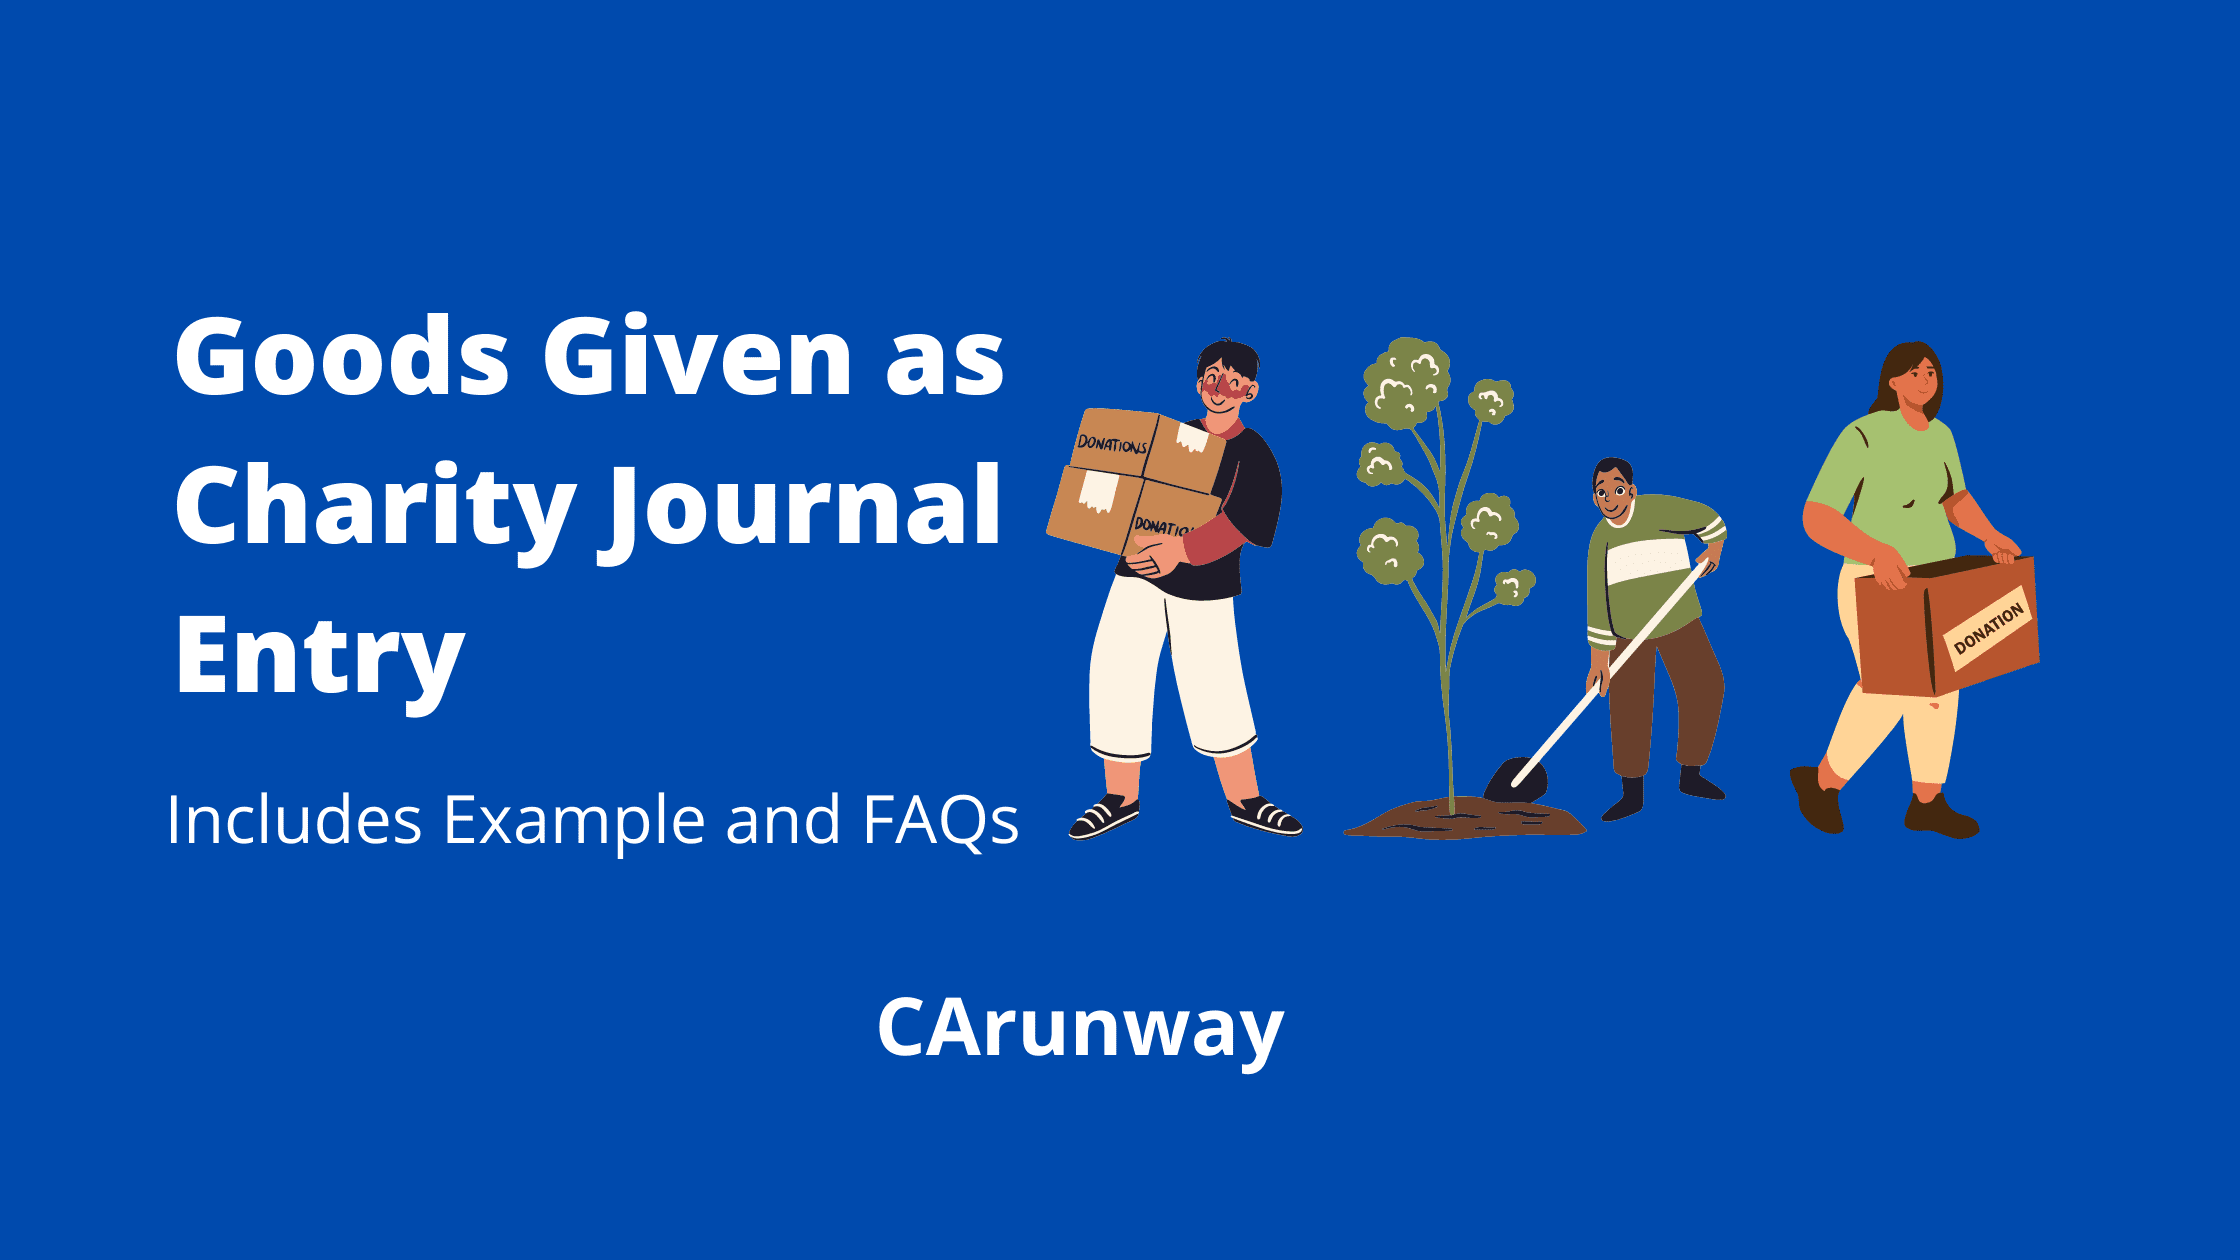 goods-given-as-charity-journal-entry-carunway